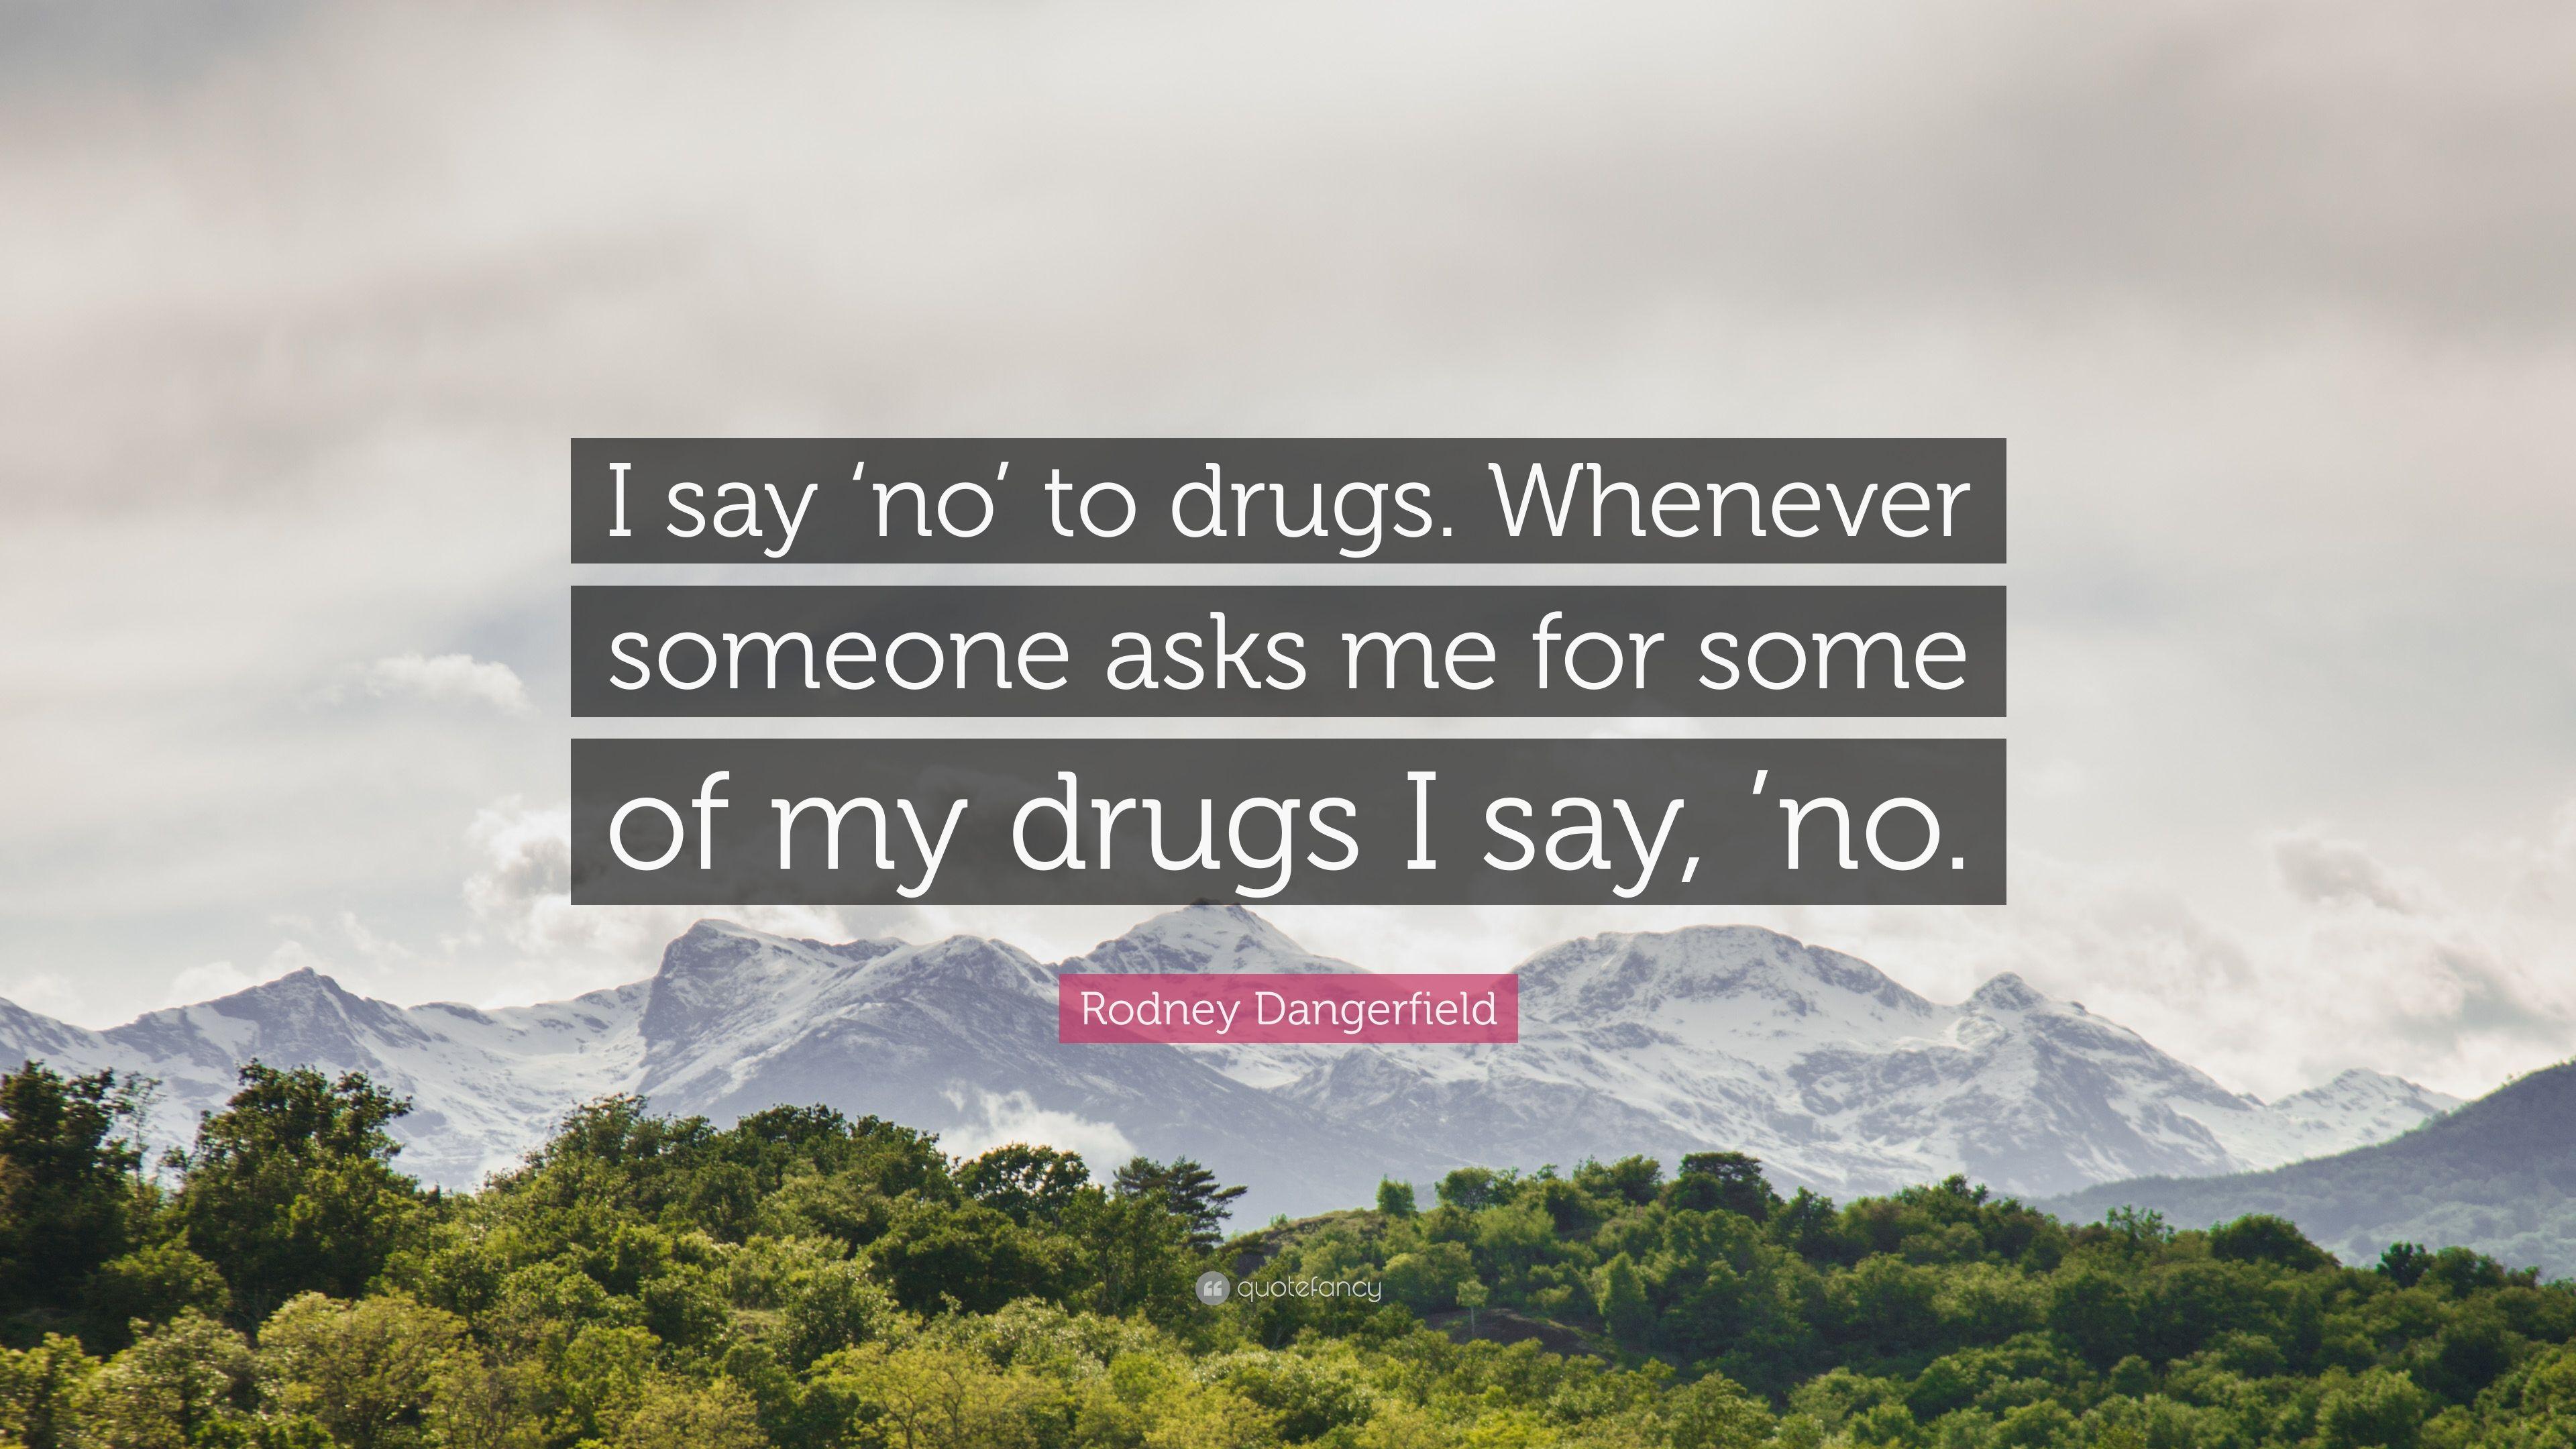 Rodney Dangerfield Quote: “I say 'no' to drugs. Whenever someone